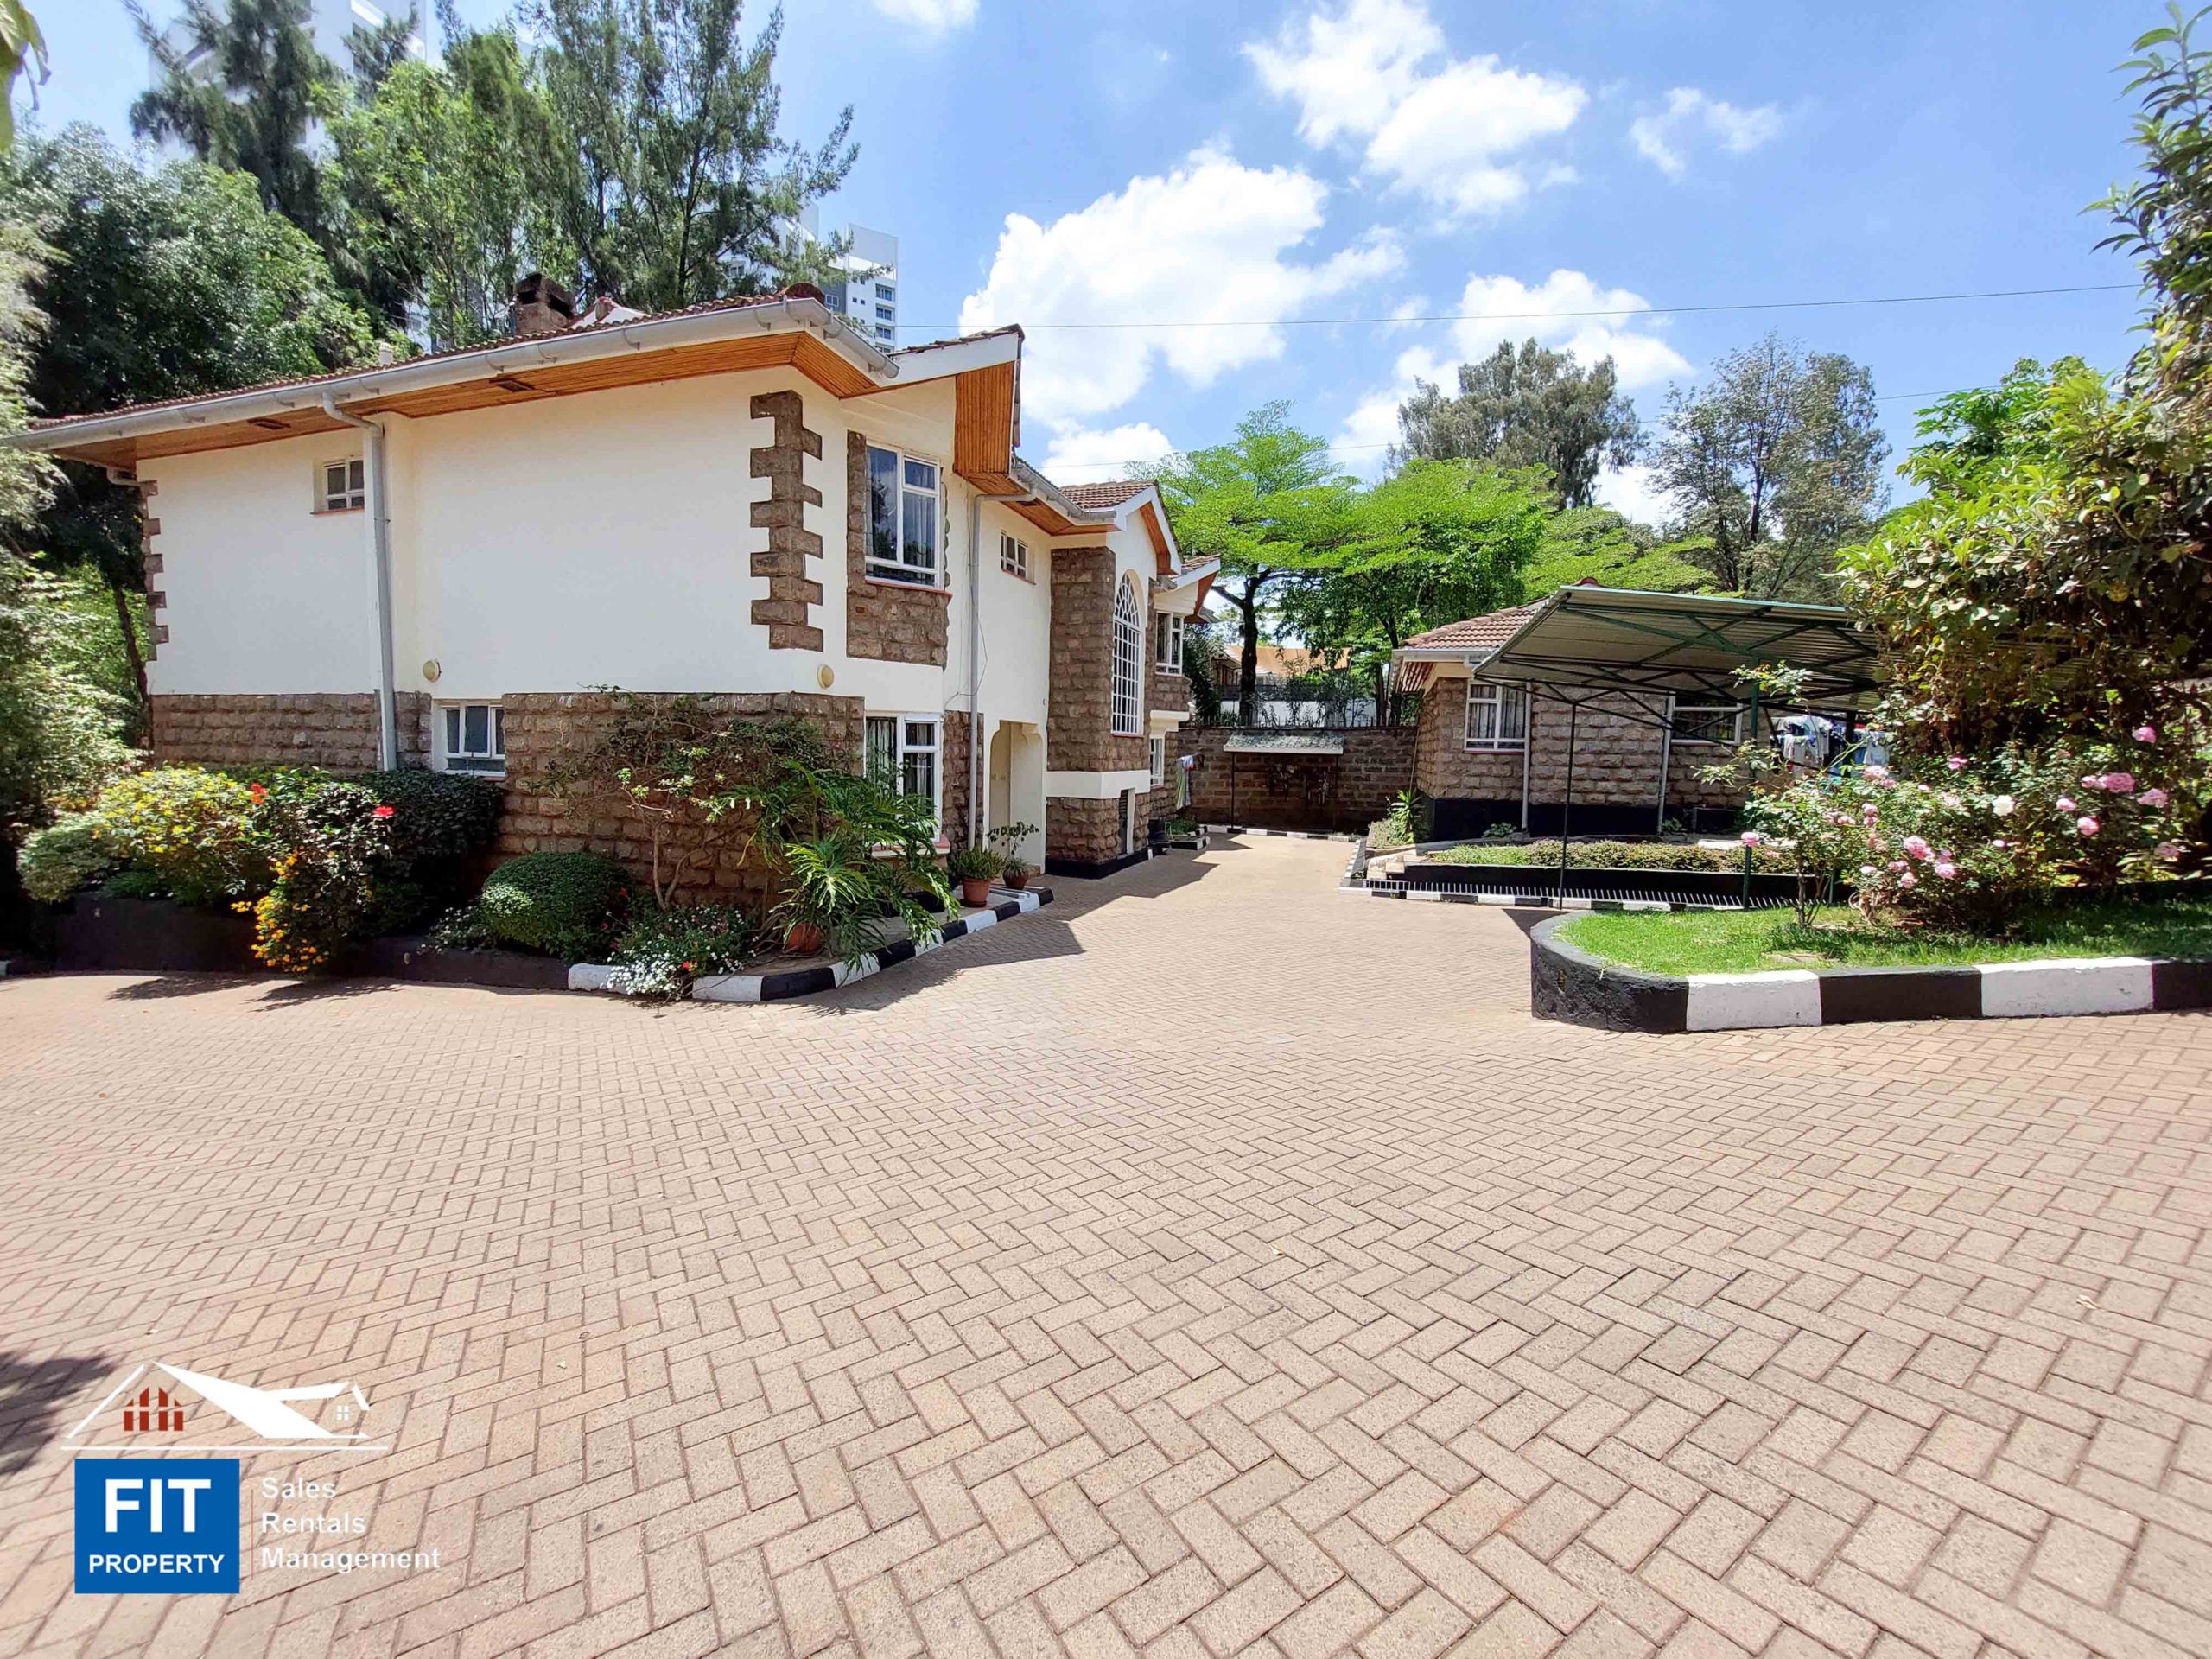 5 Bedroom House for Rent in a Gated Community, Off Ole Nguruone Road, Nairobi. Price: USD 2,000 per month.